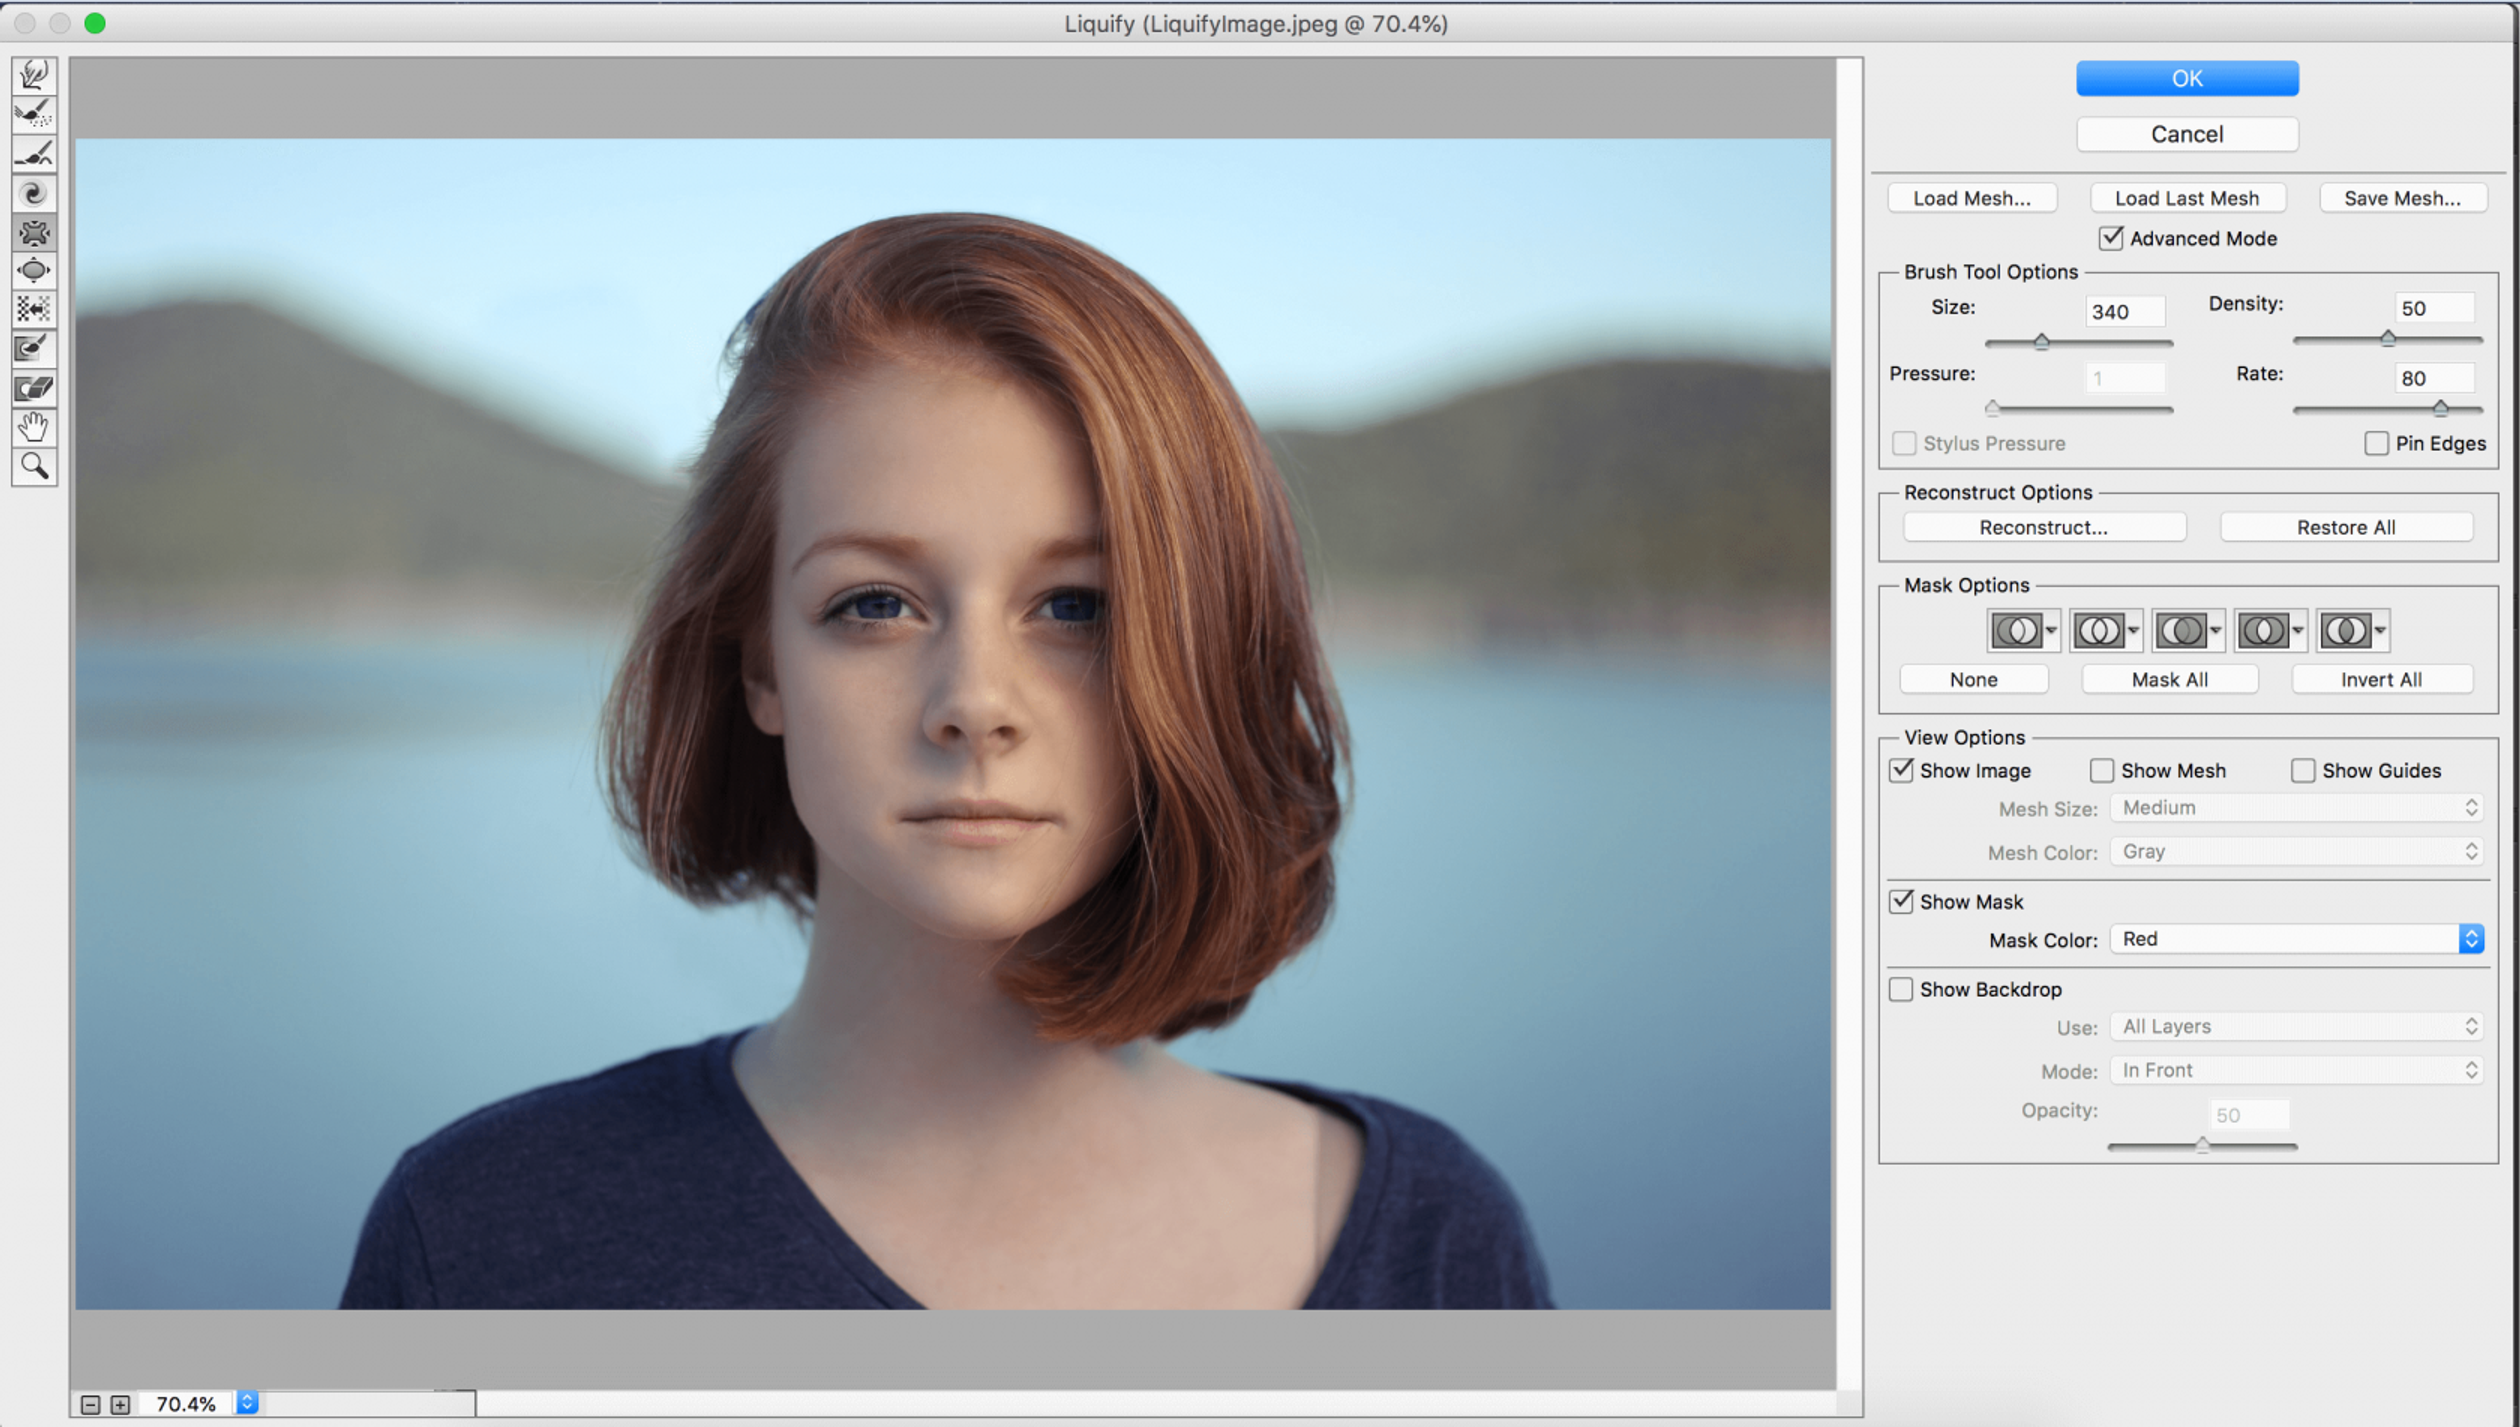 How to Use the Liquify Tool in Photoshop - Ultimate Guide